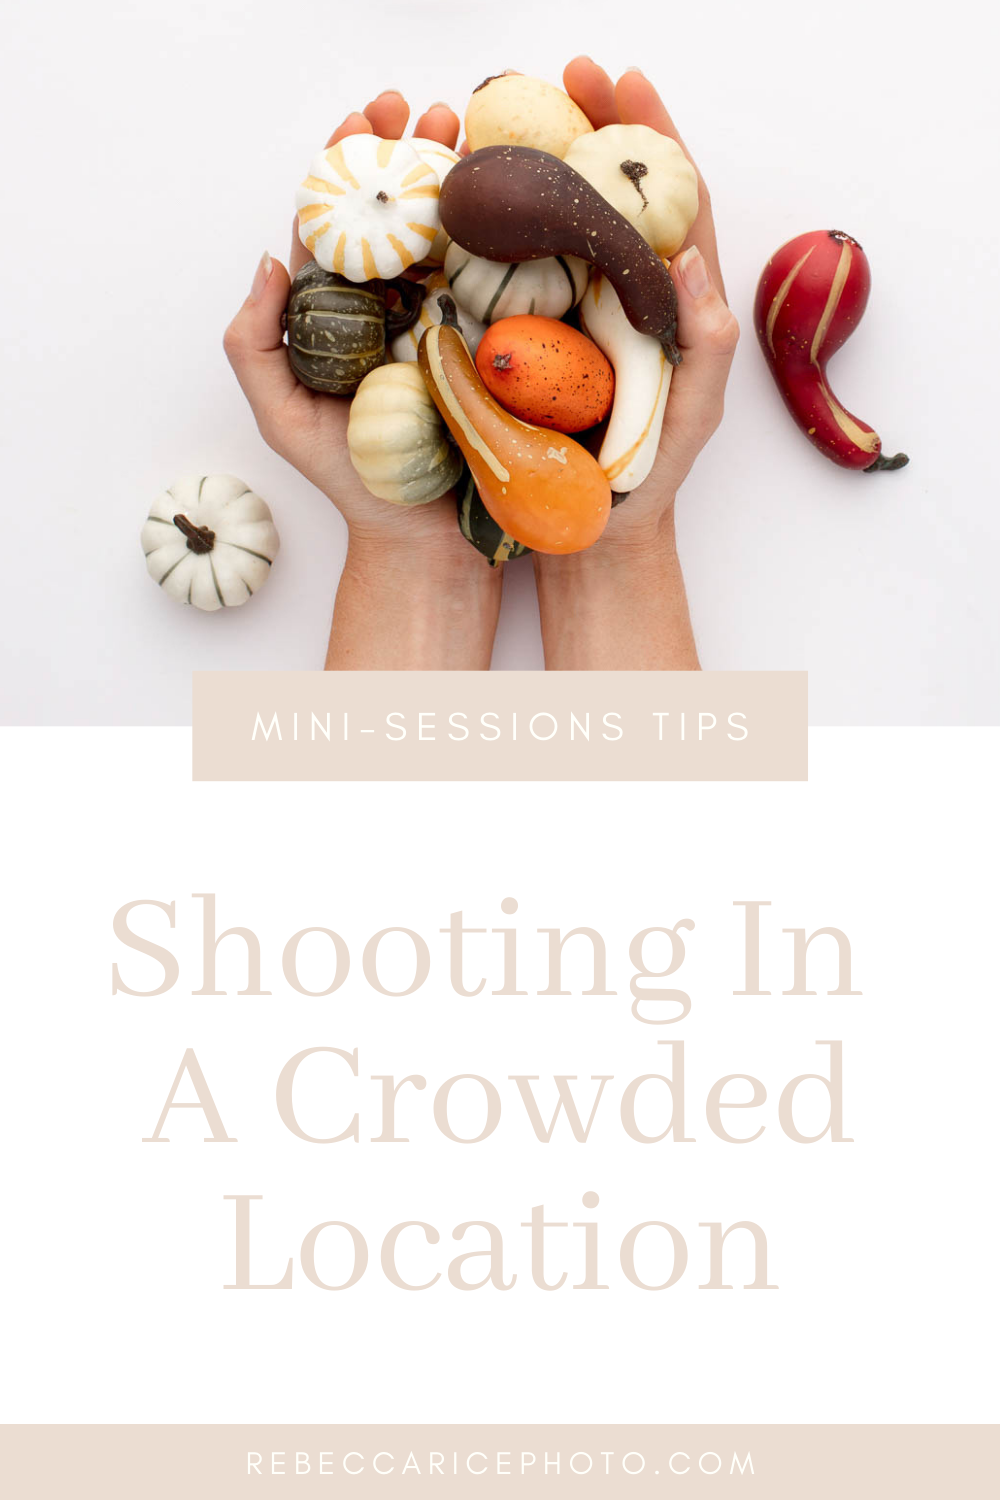 Shooting At a Crowded Location  // Rebecca Rice Education #minisessions #minisessionsideas #minisessionsinspiration #minisideas #minisessiontips #photographytips #familyphotography #familyphotographytips #businesstips #photolocationideas